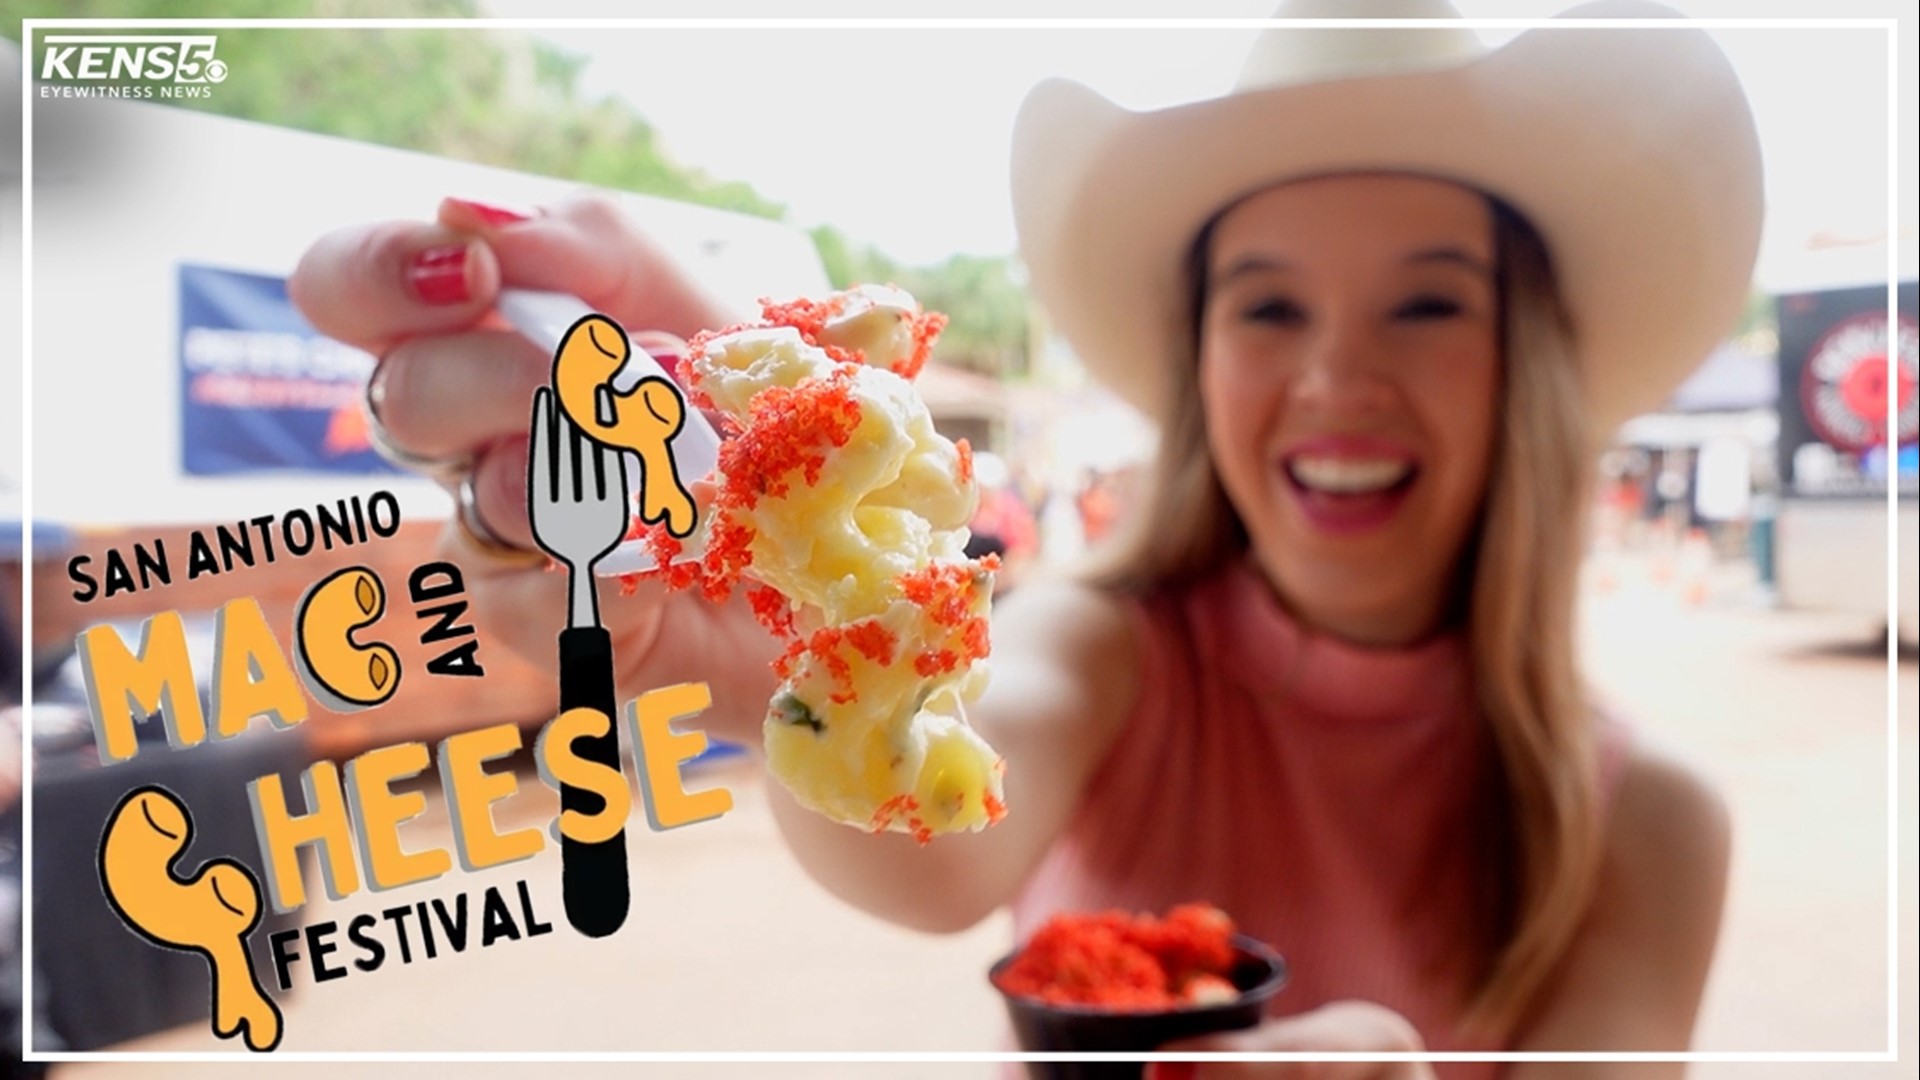 Who doesn't love mac & cheese?! Many Texans do, so there's a festival in their honor!